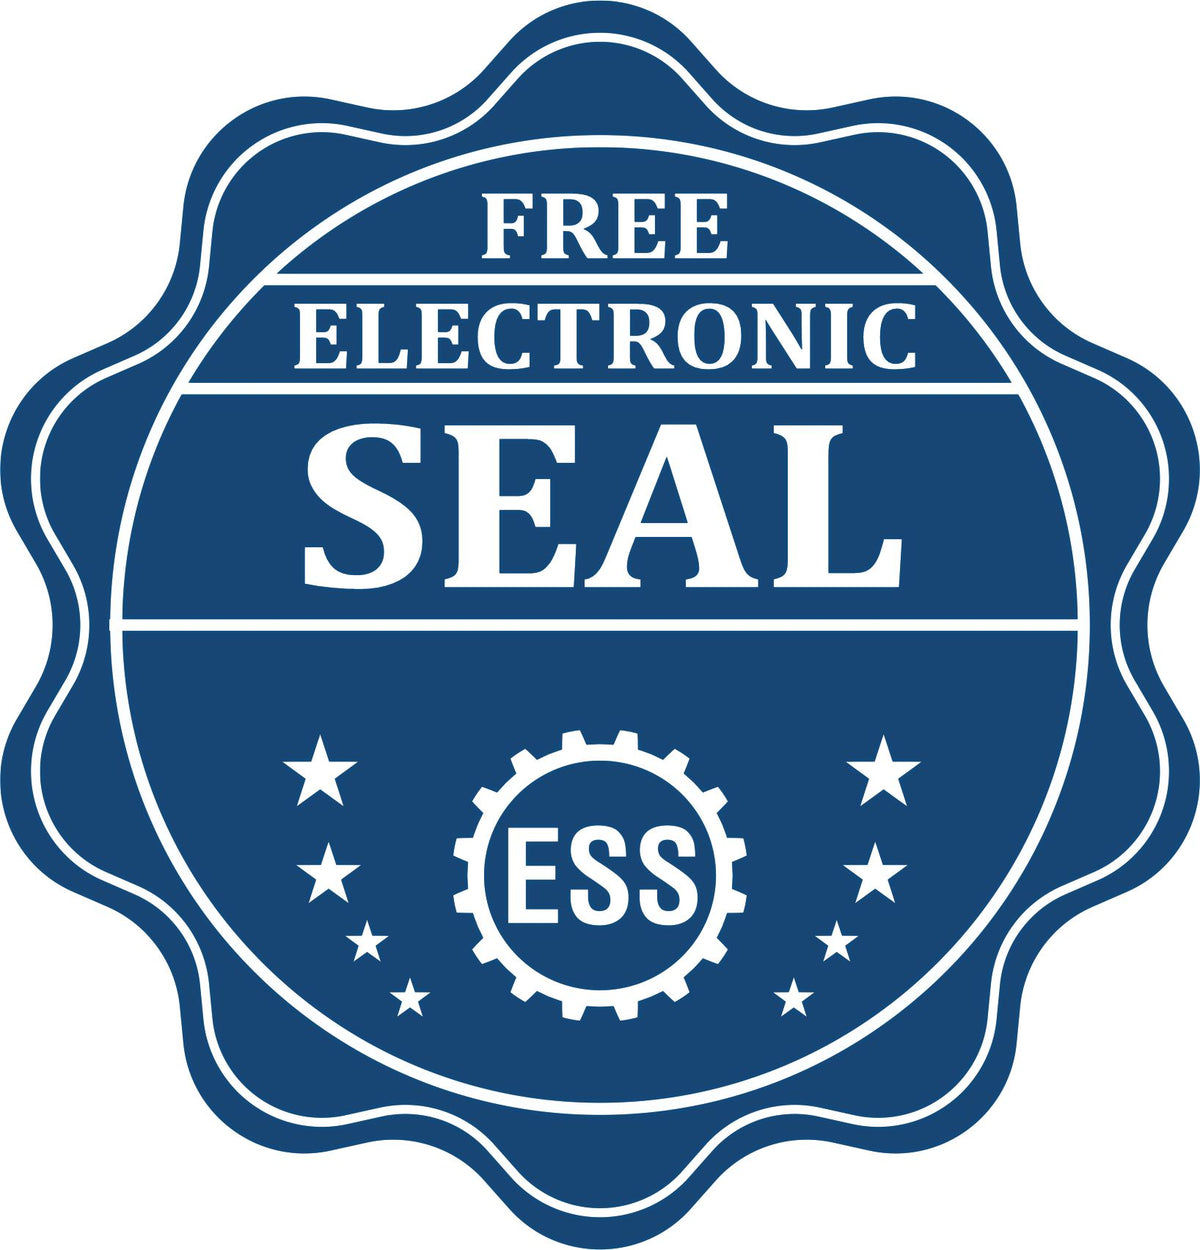 A badge showing a free electronic seal for the Gift Texas Architect Seal with stars and the ESS gear on the emblem.